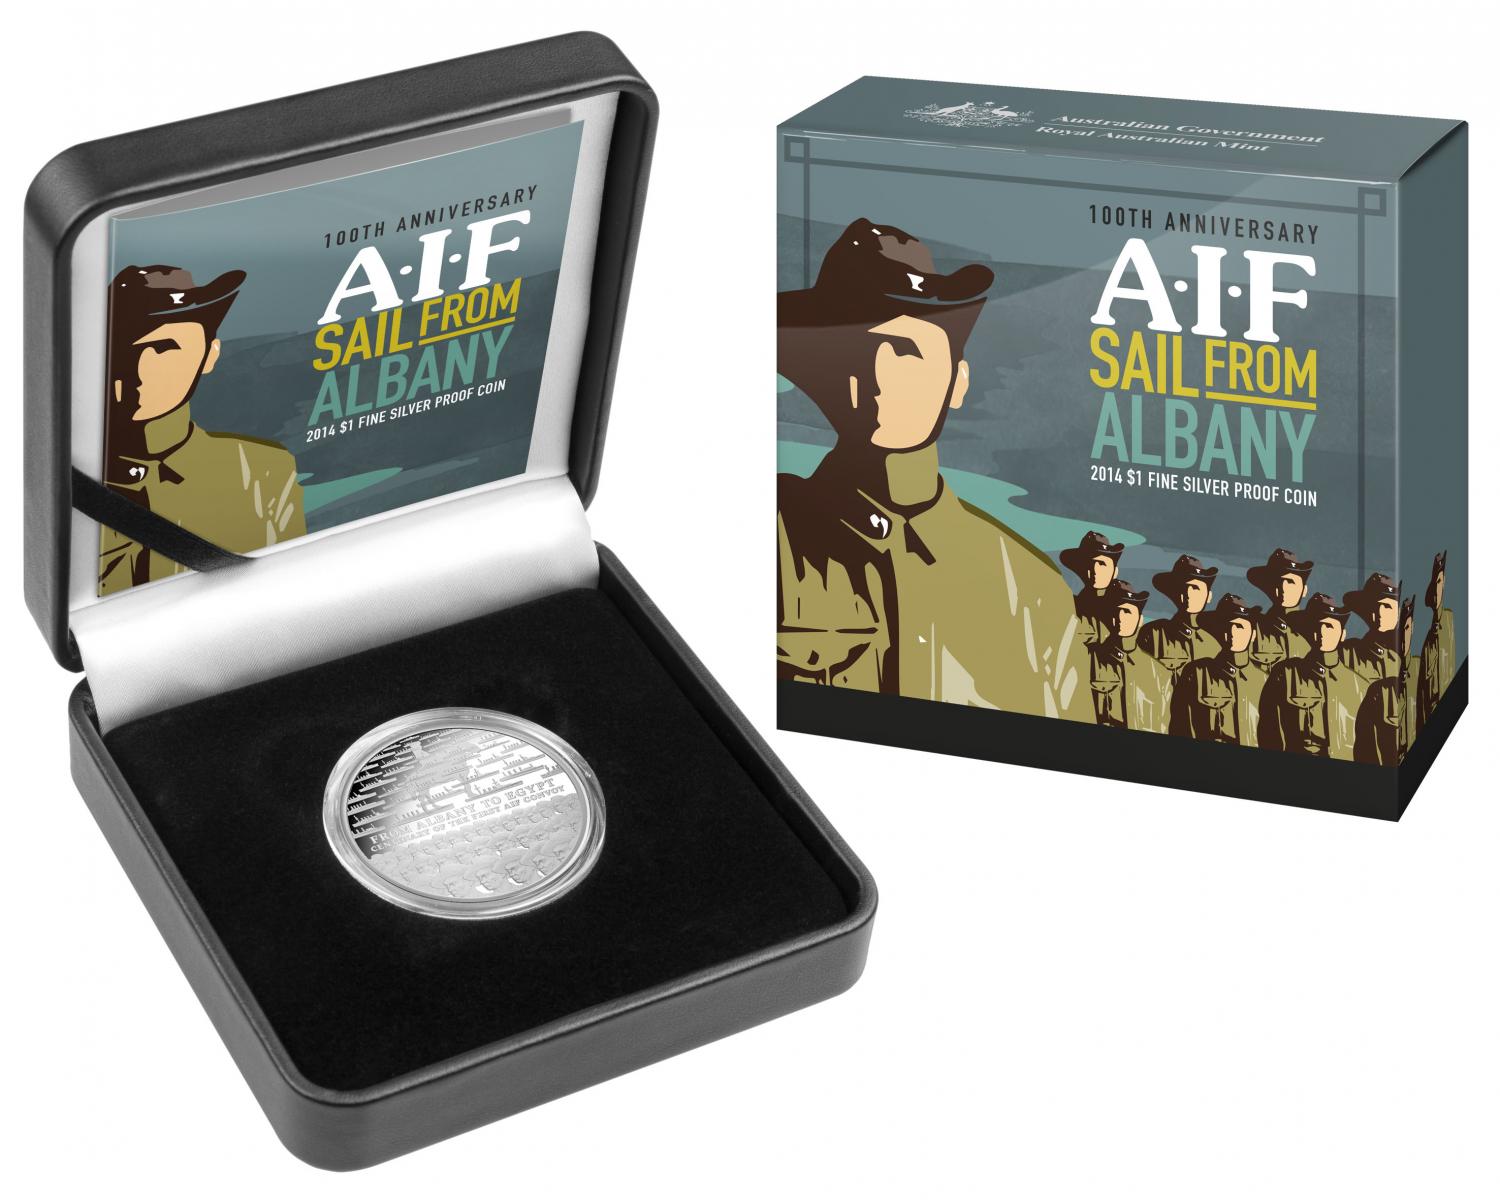 Thumbnail for 2014 100th Anniversary A.I.F Sail from Albany $1.00 1oz Silver Proof Coin